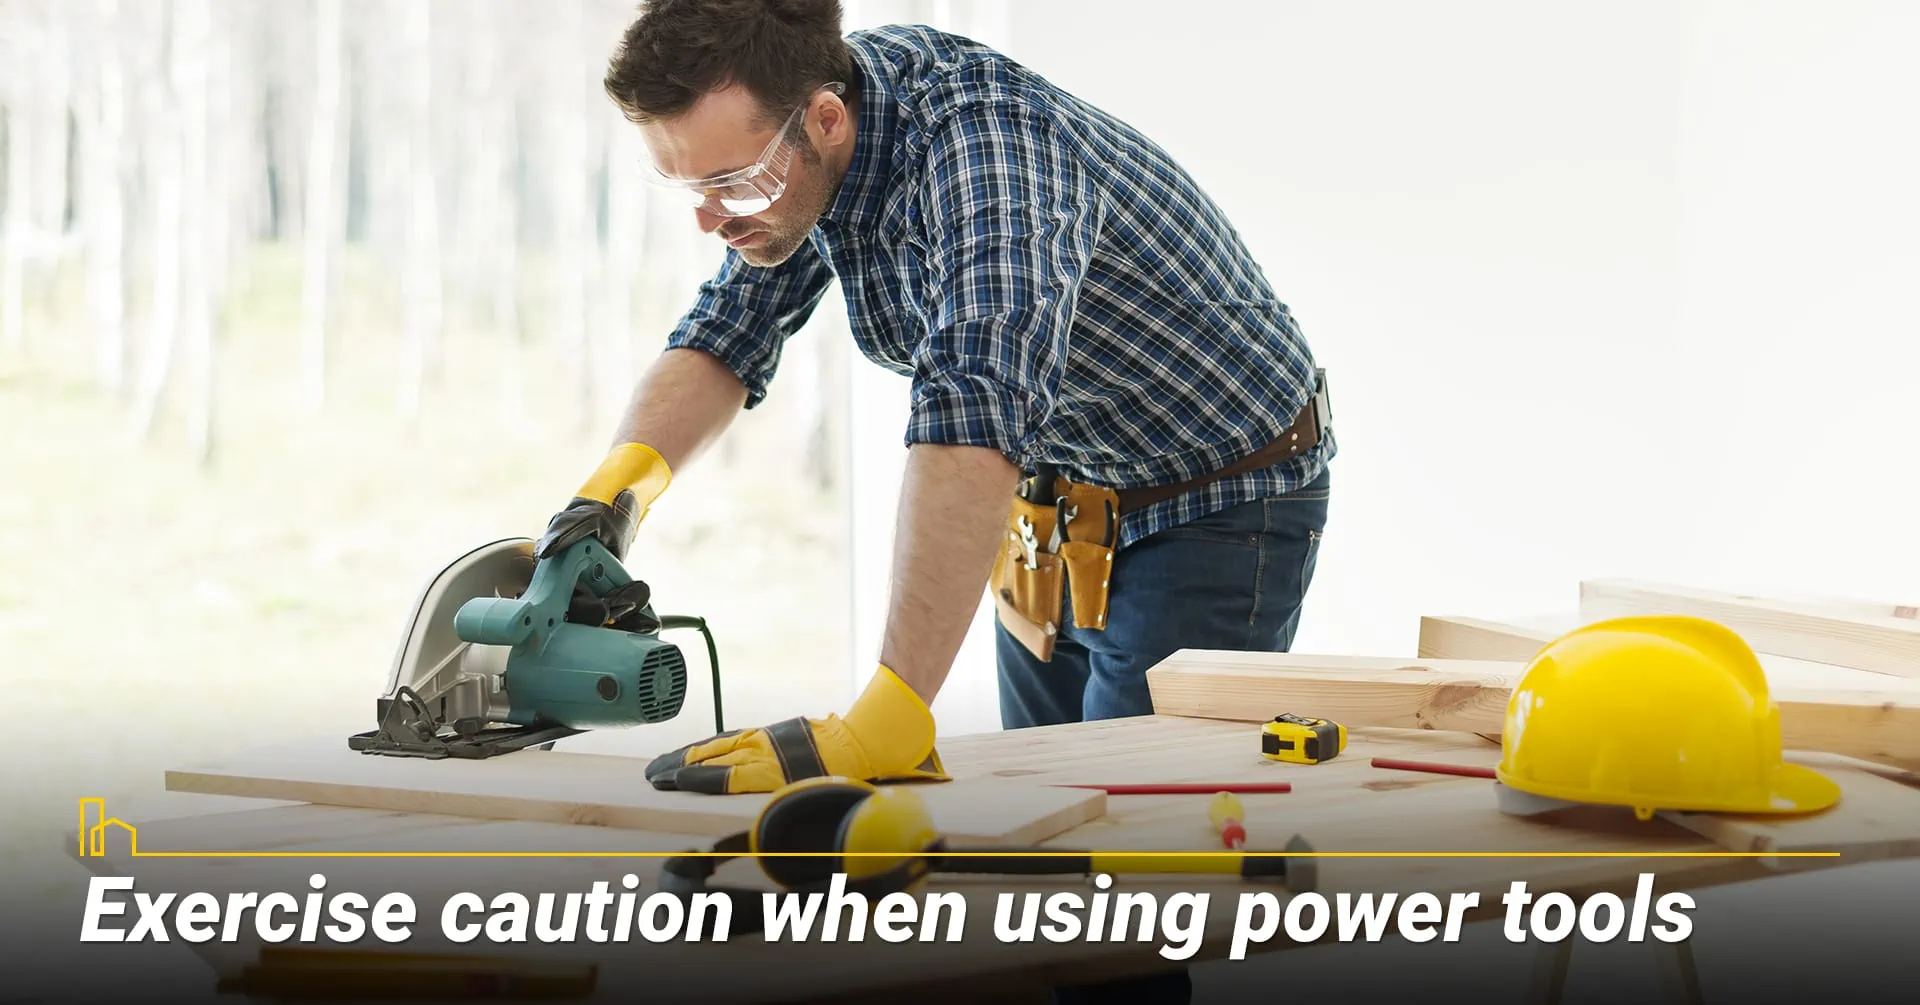 Exercise caution when using power tools.